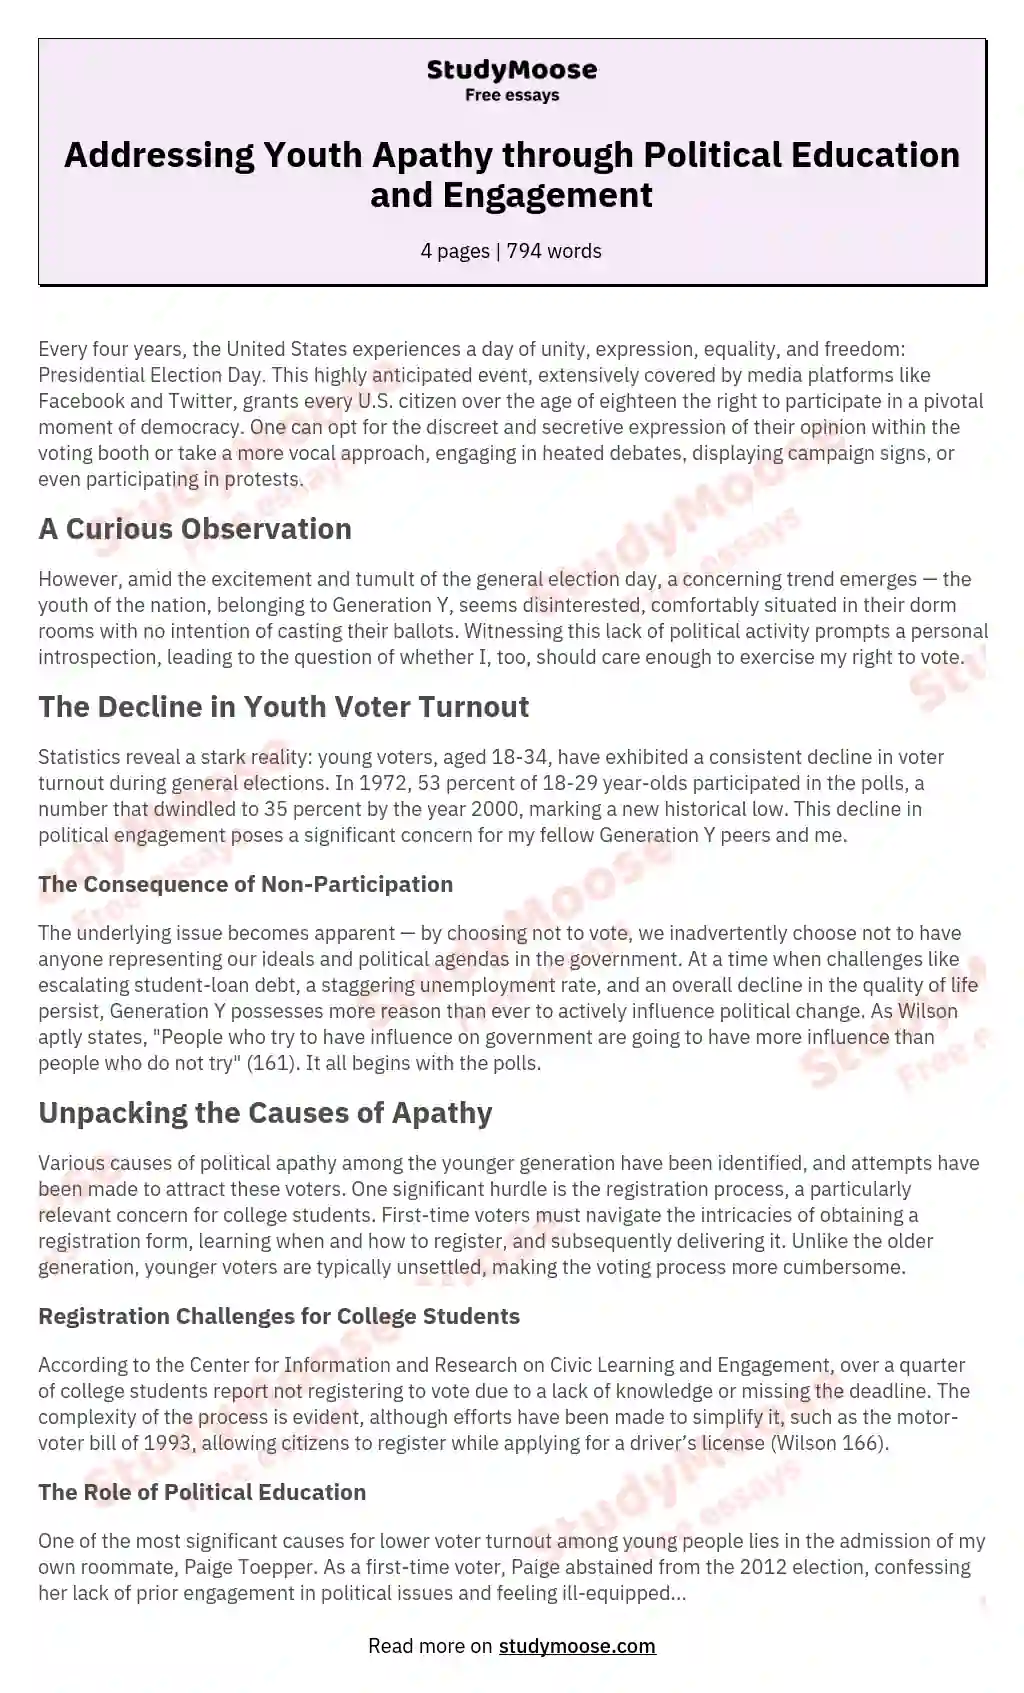 Addressing Youth Apathy through Political Education and Engagement essay